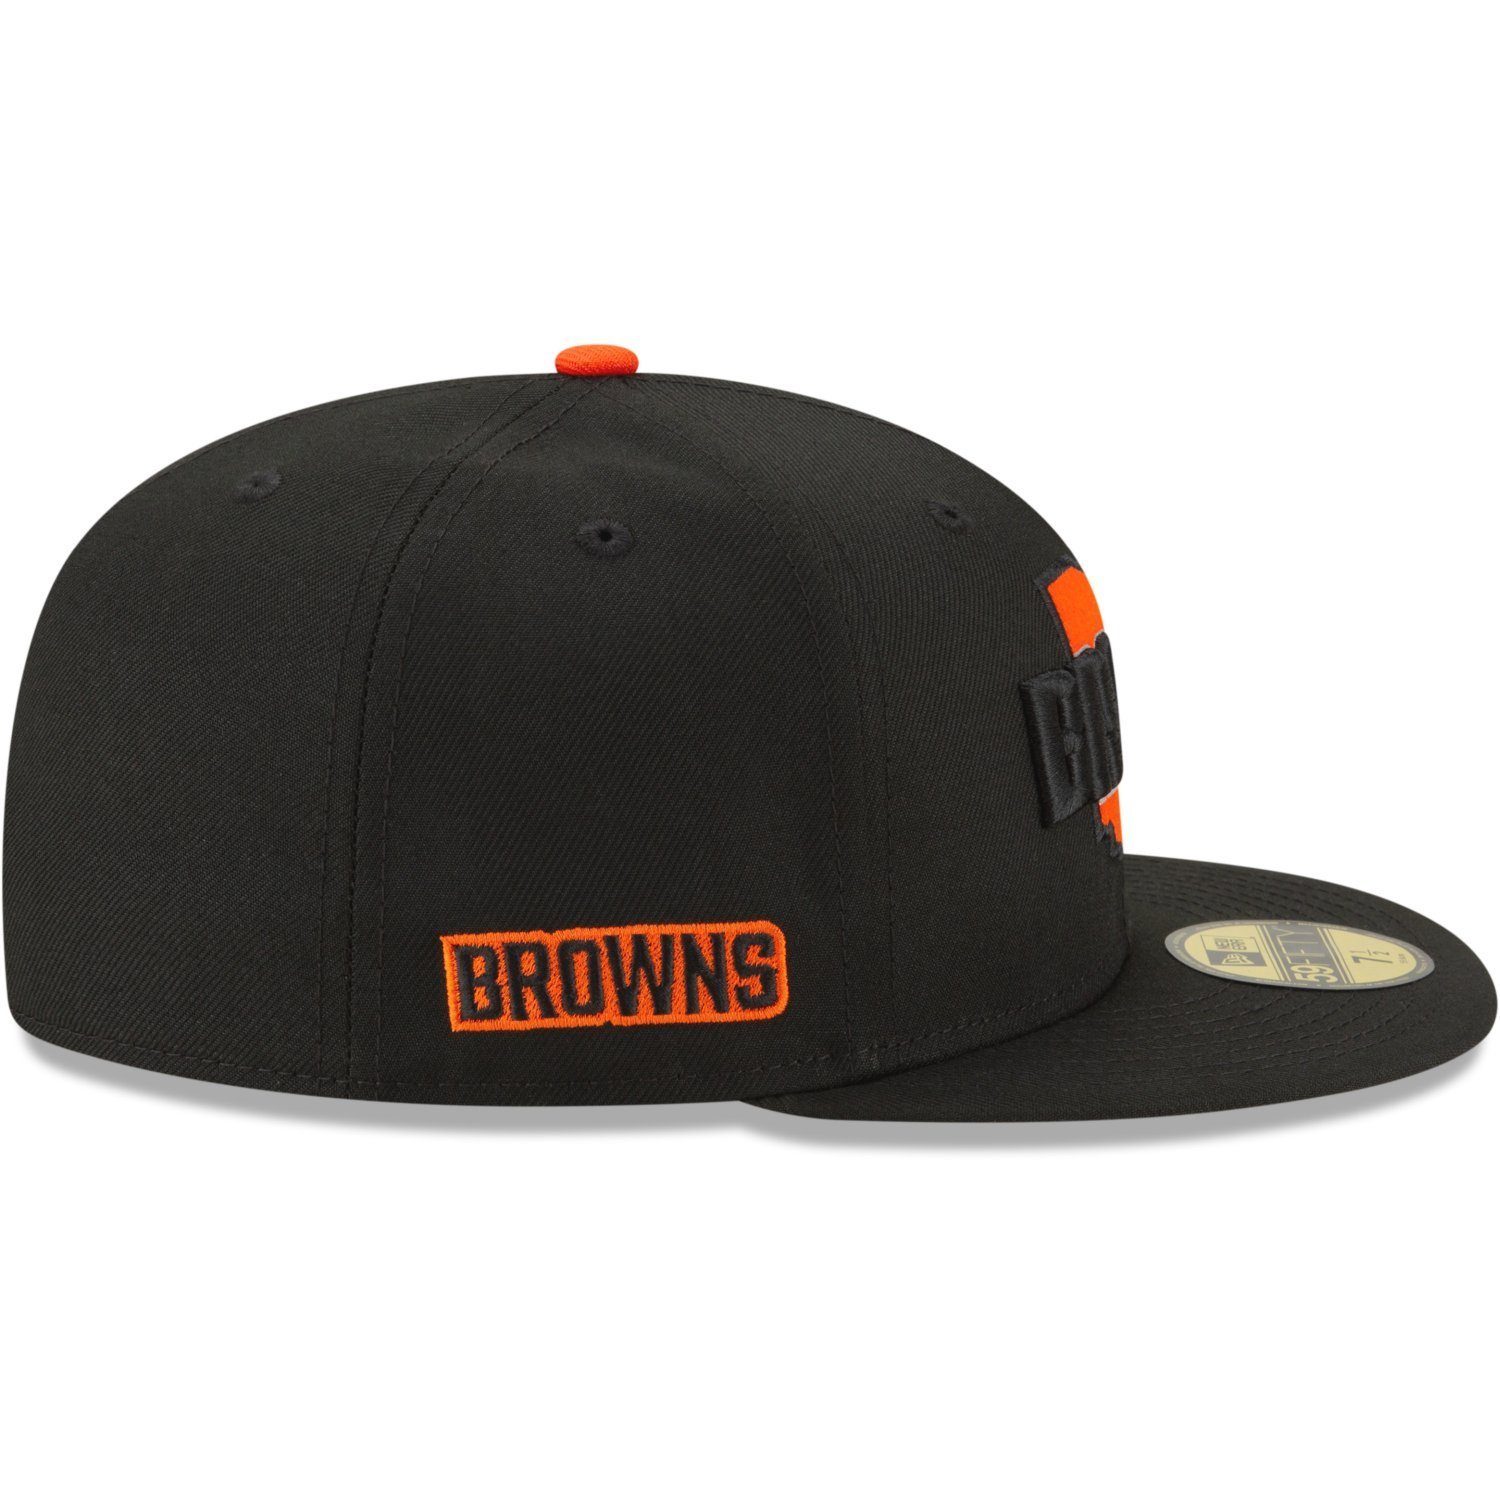 New Teams STATE 59Fifty Cleveland Browns Era LOGO Cap Fitted NFL